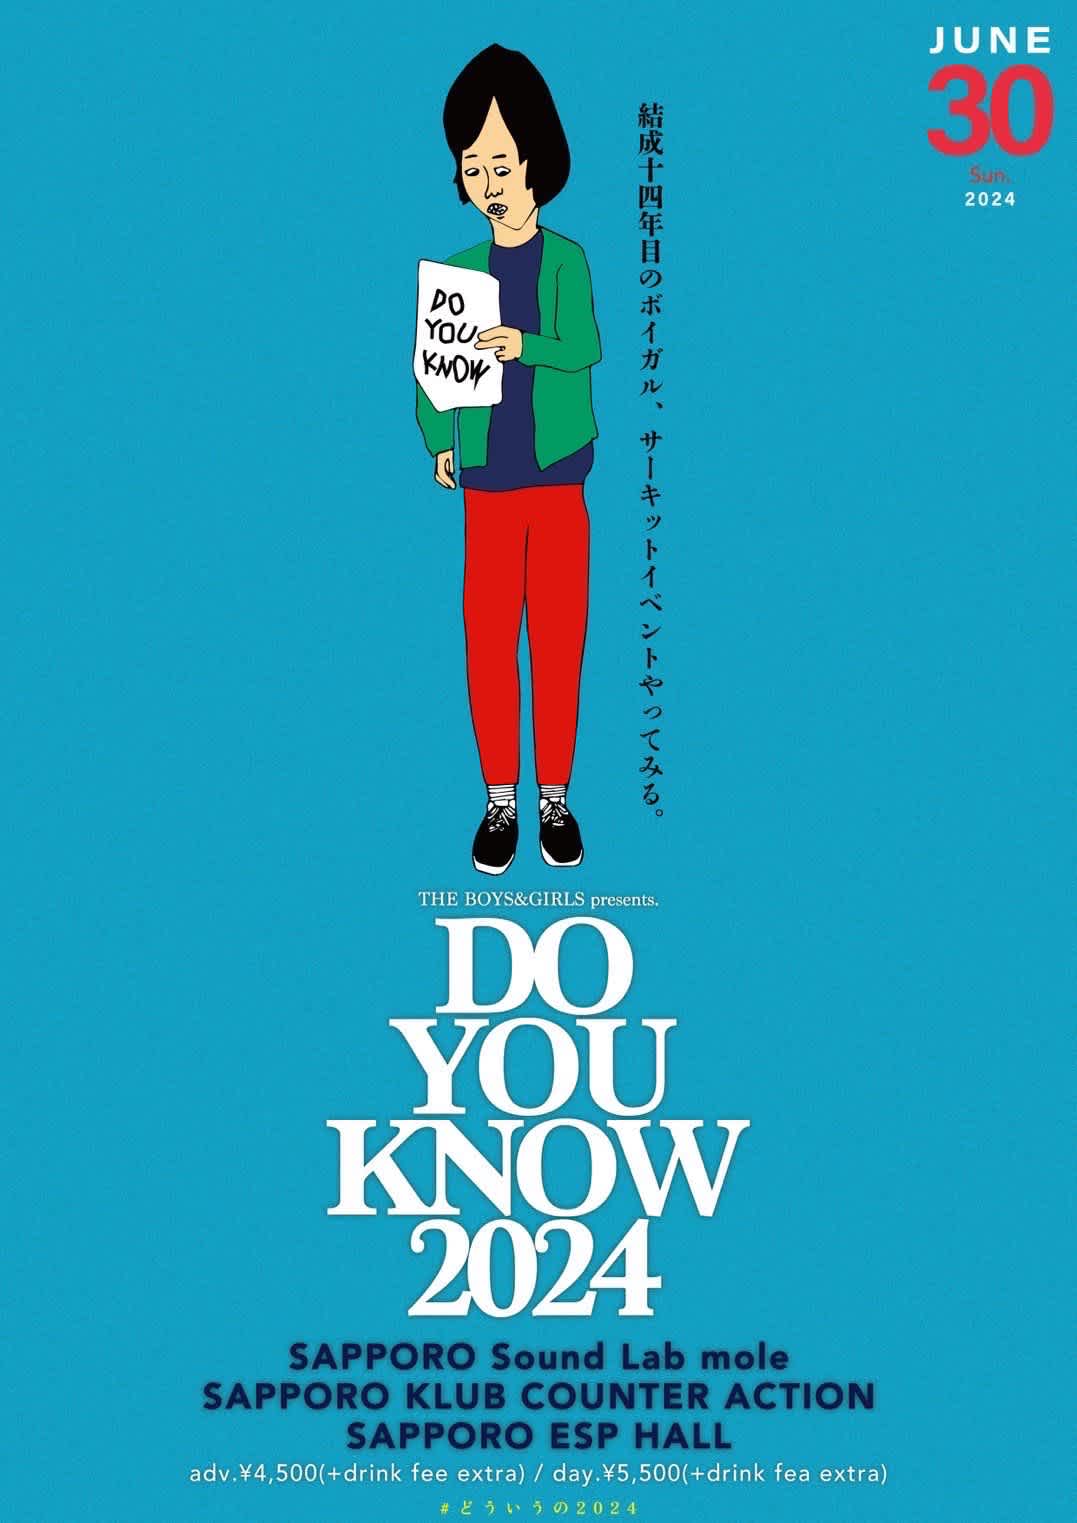 THE BOYS&GIRLS pre. "DO YOU KNOW 2024"のイメージ1